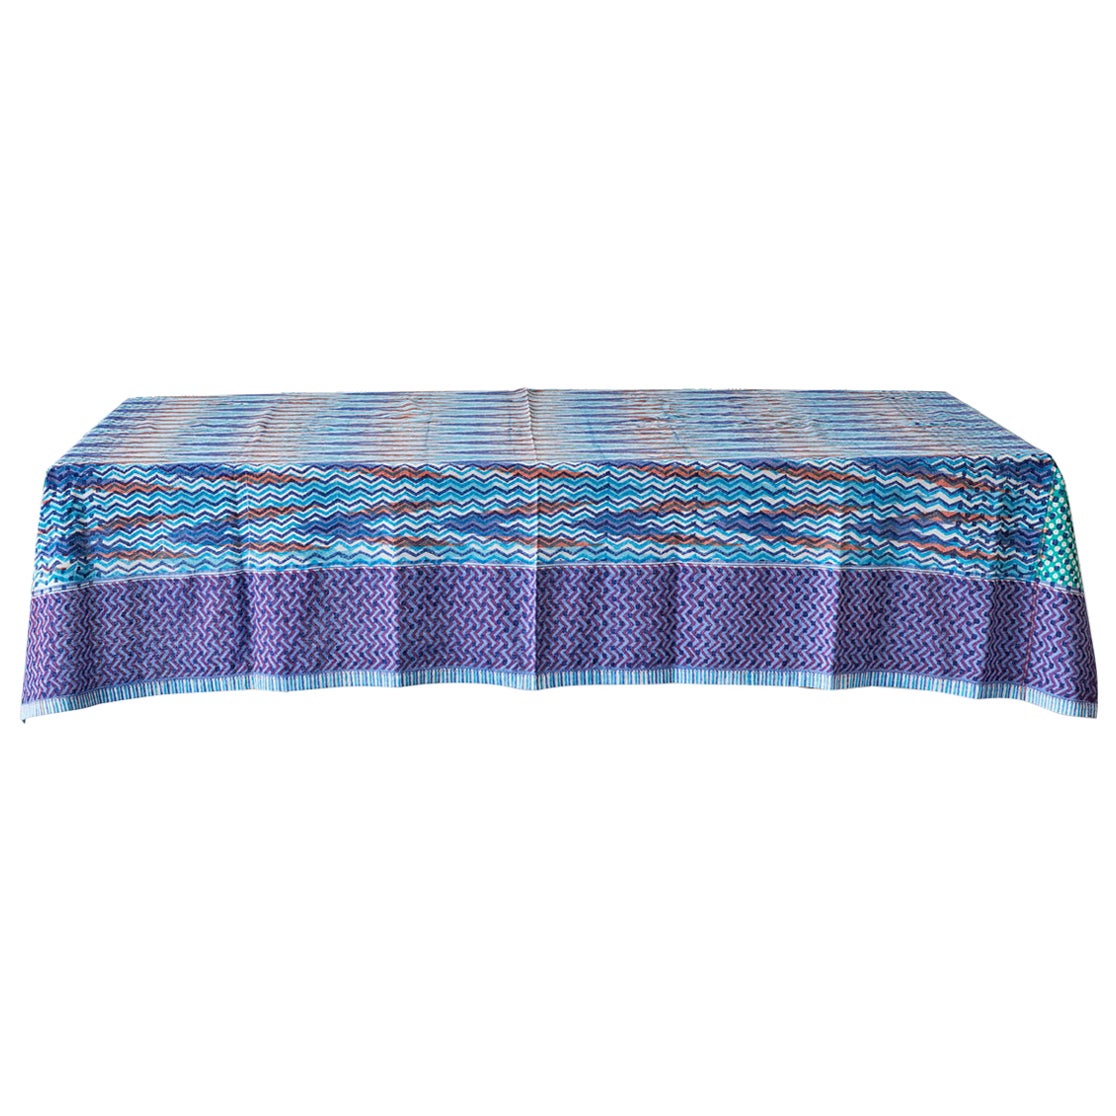 Contemporary Gregory Parkinson Tablecloth with Hand-Blocked Patterns, USA